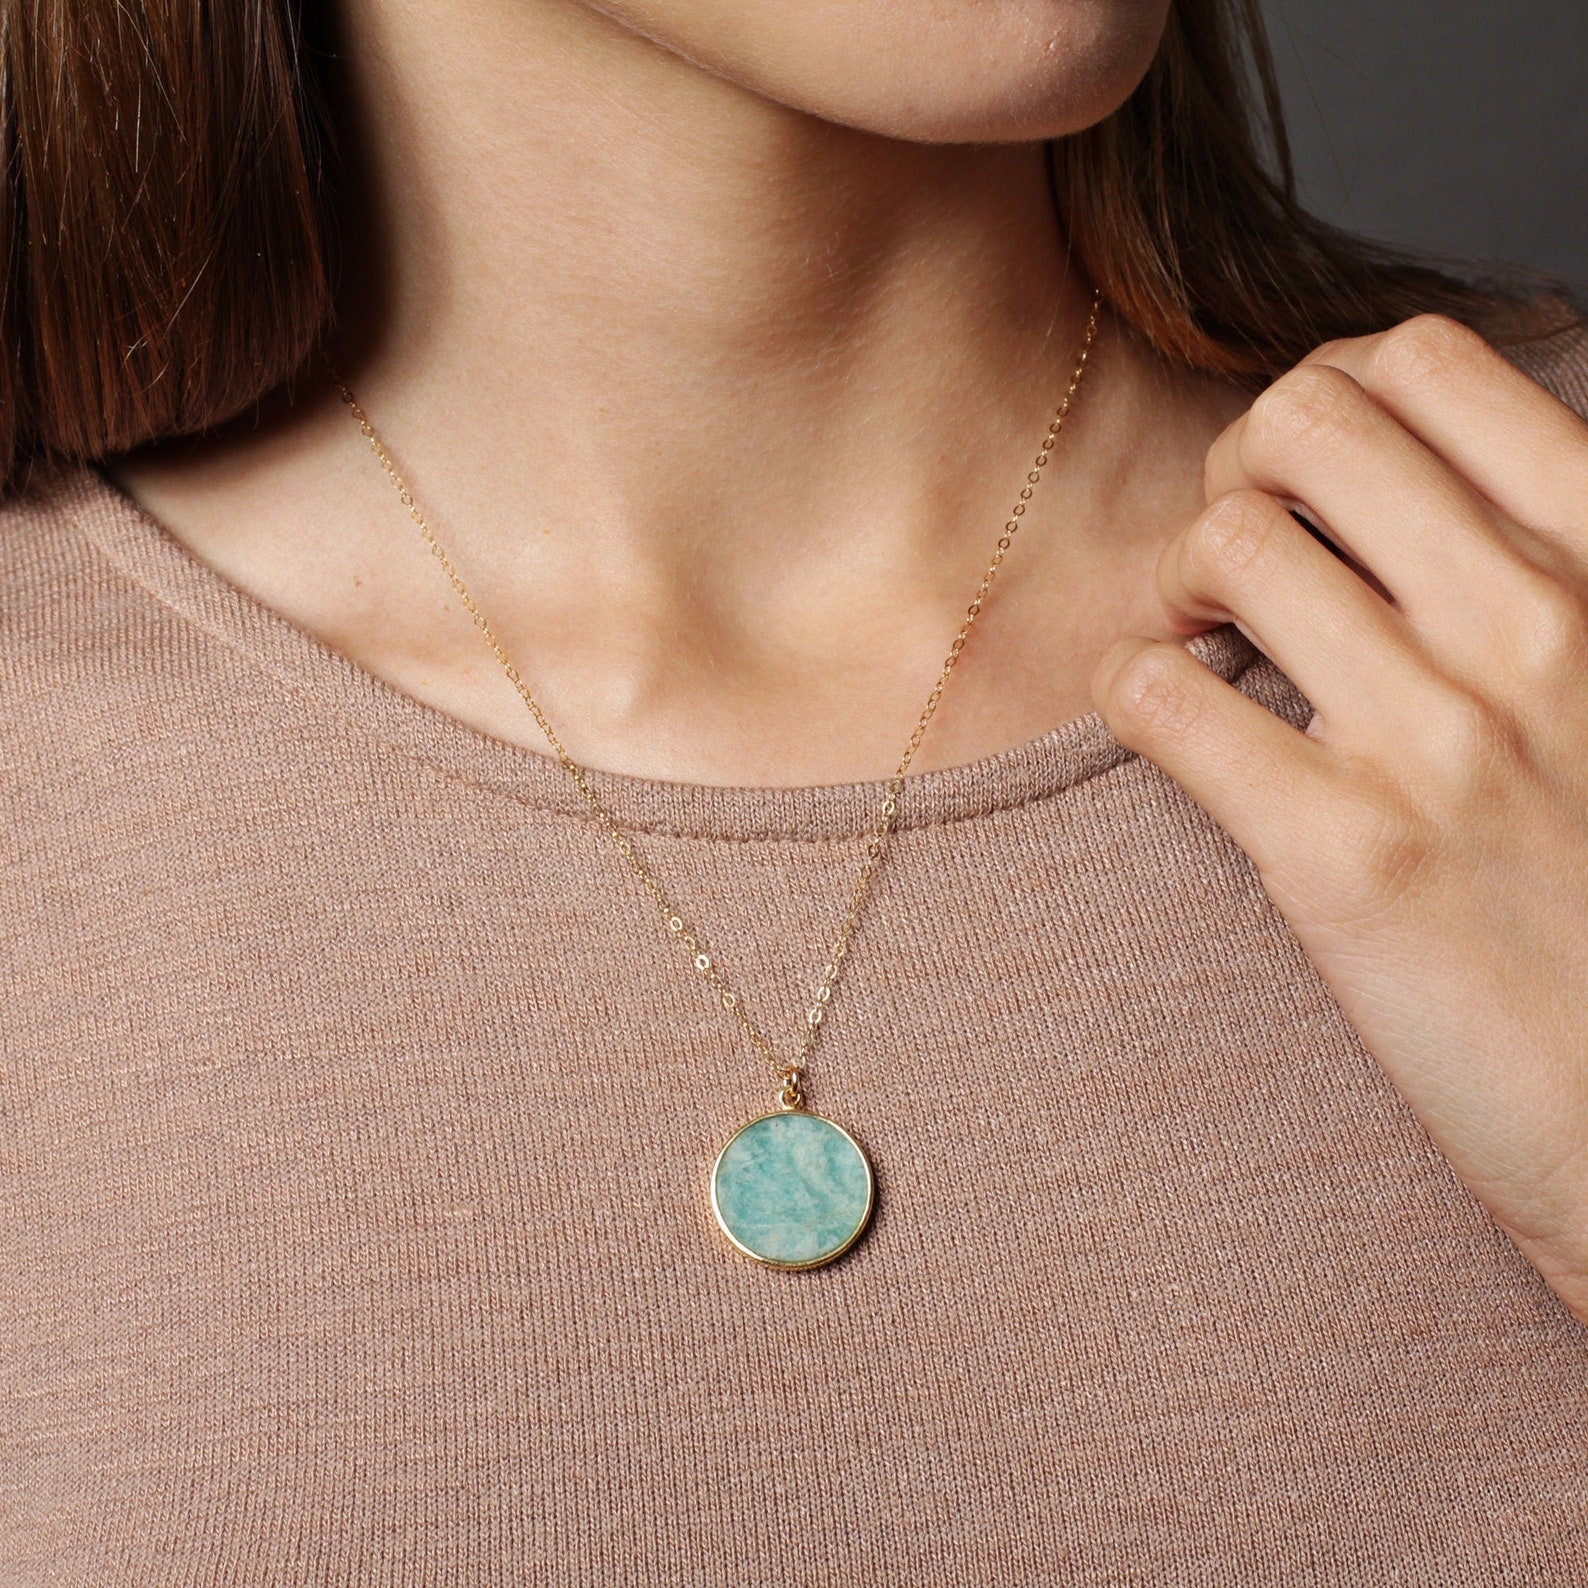 All about gemstones: Amazonite